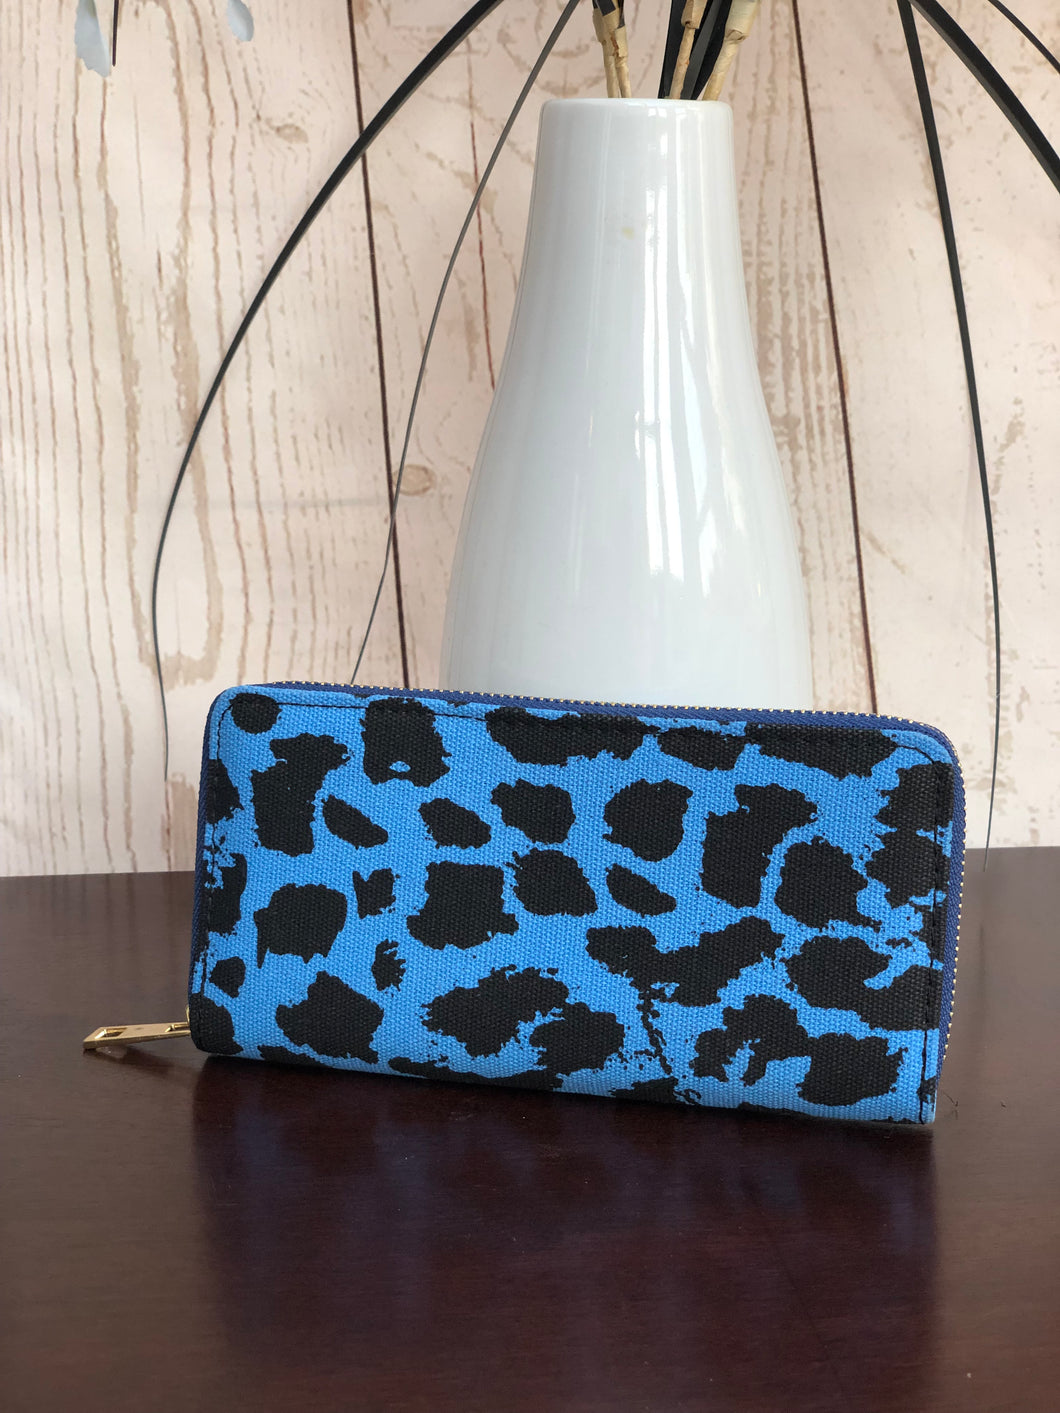 Luella Brown Leopard Cowhide Purse - Accessories from Shirt Sleeves UK